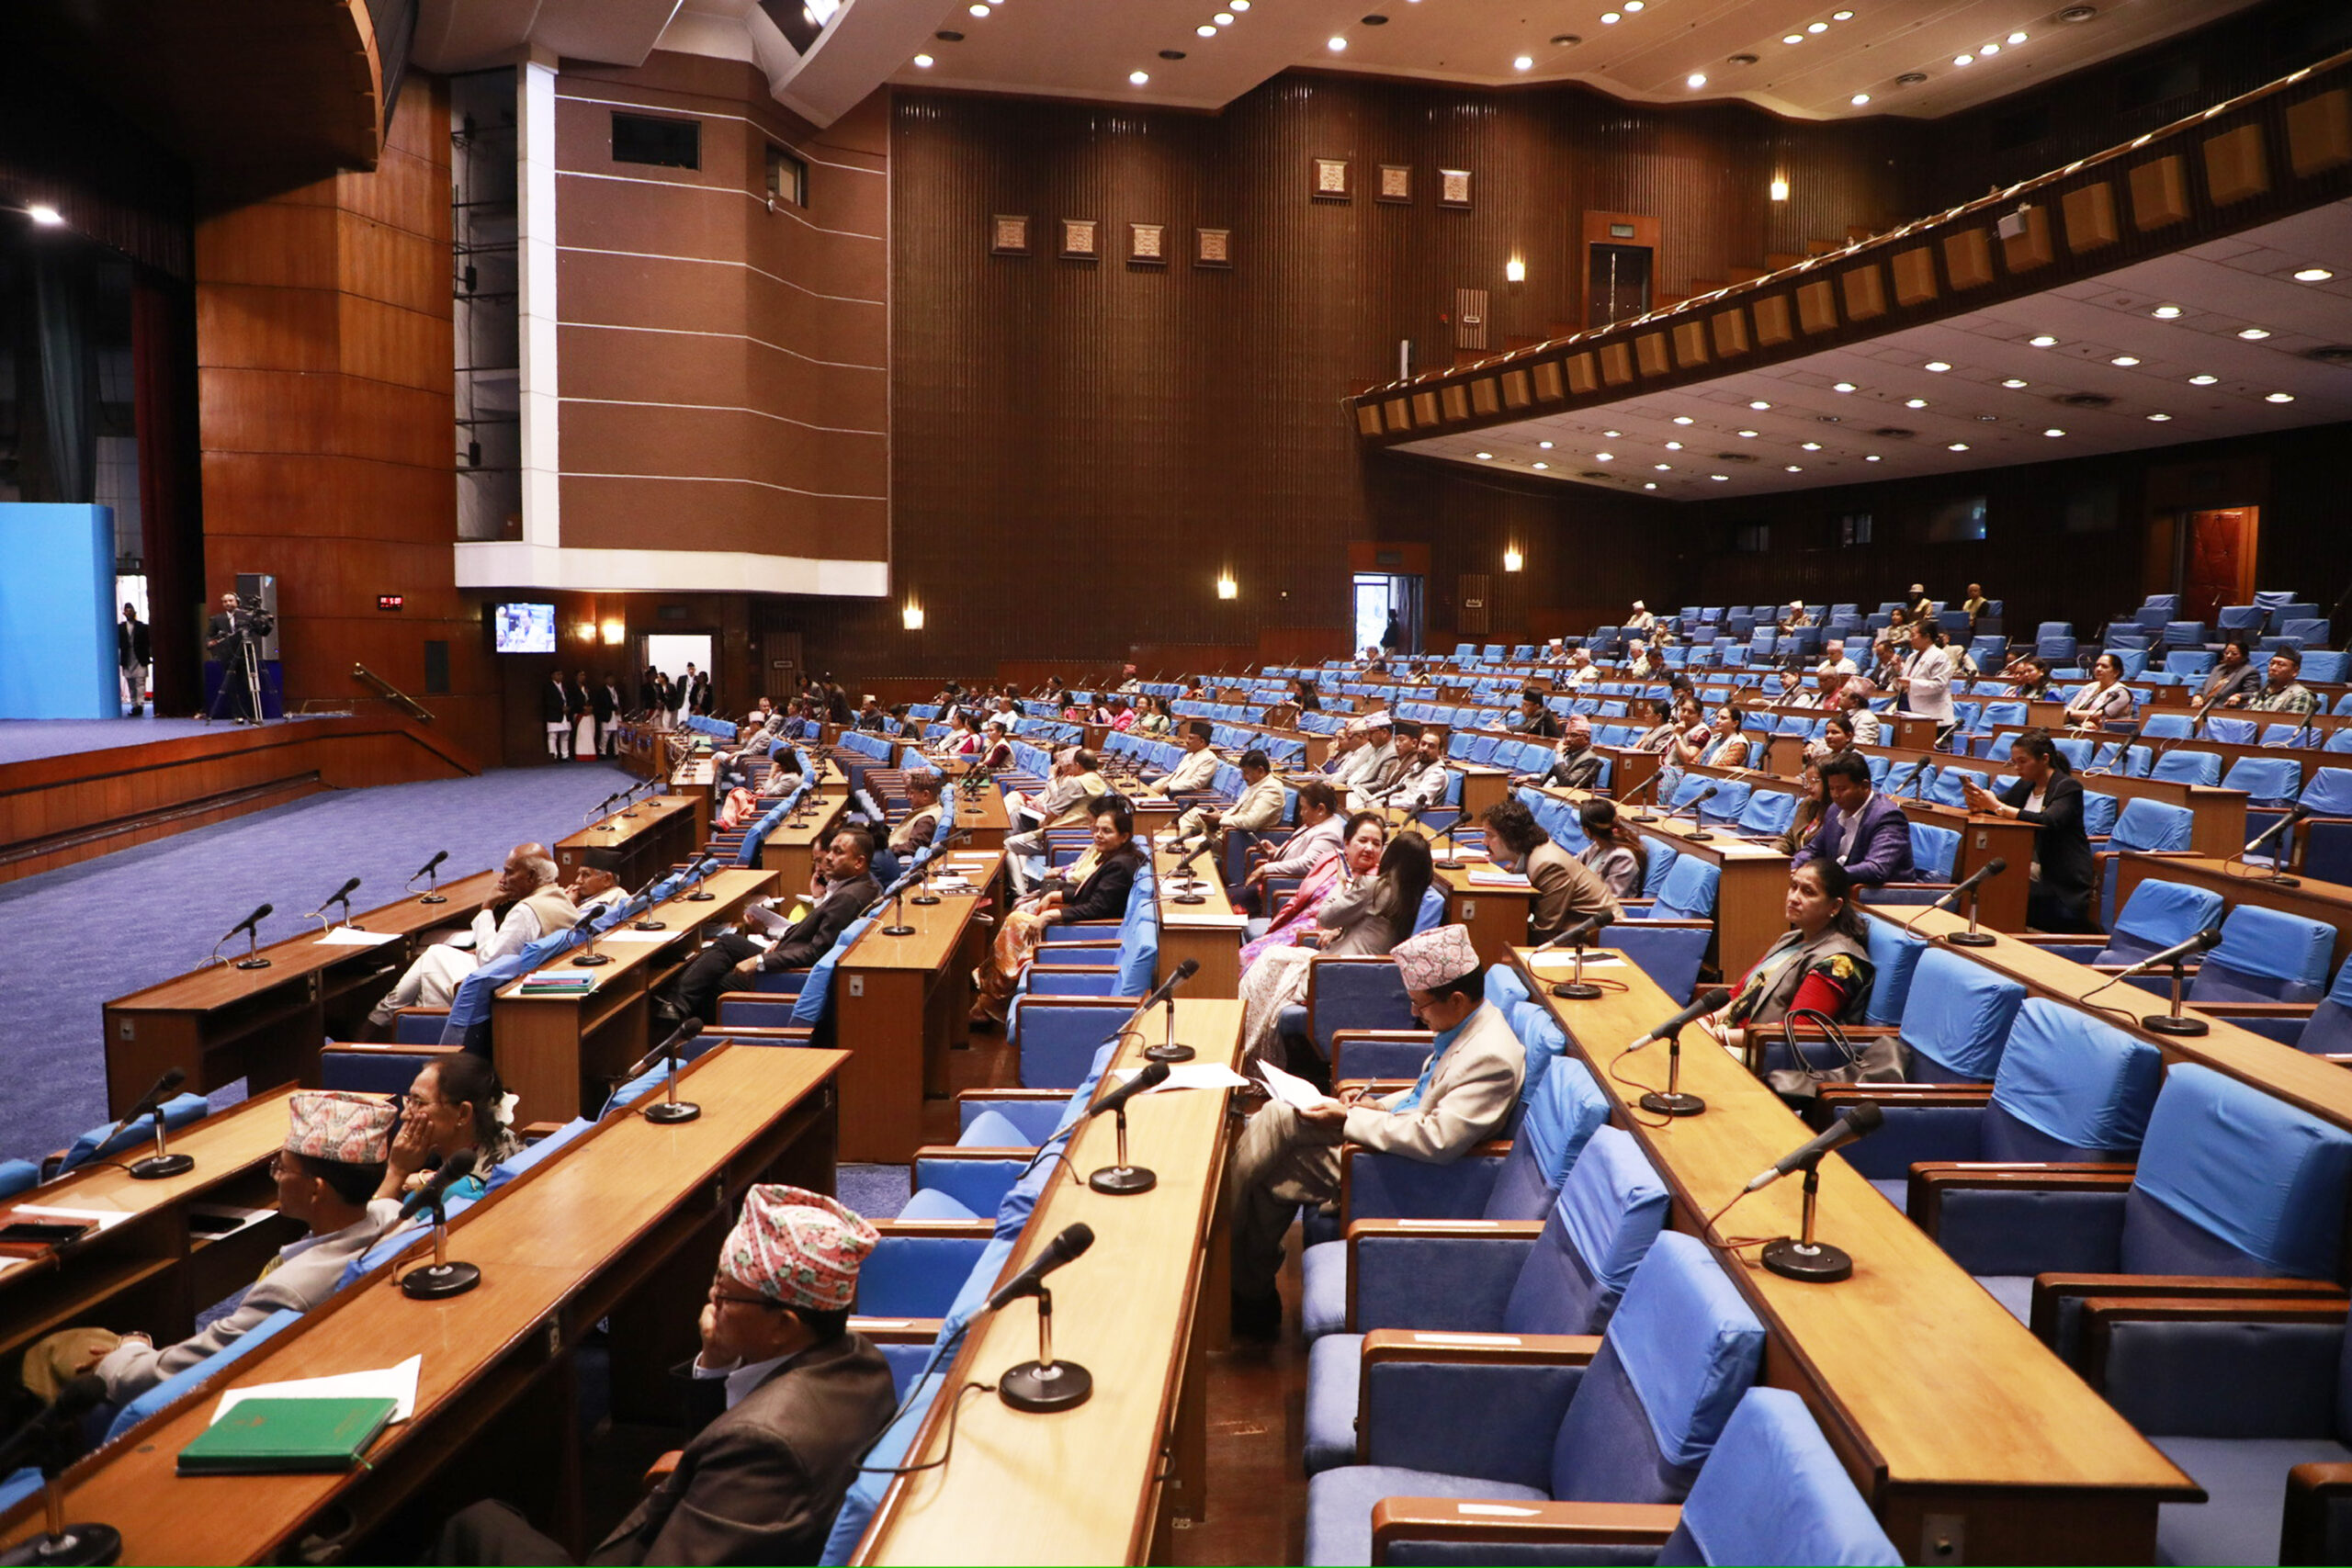 House of Representatives meeting taking place today